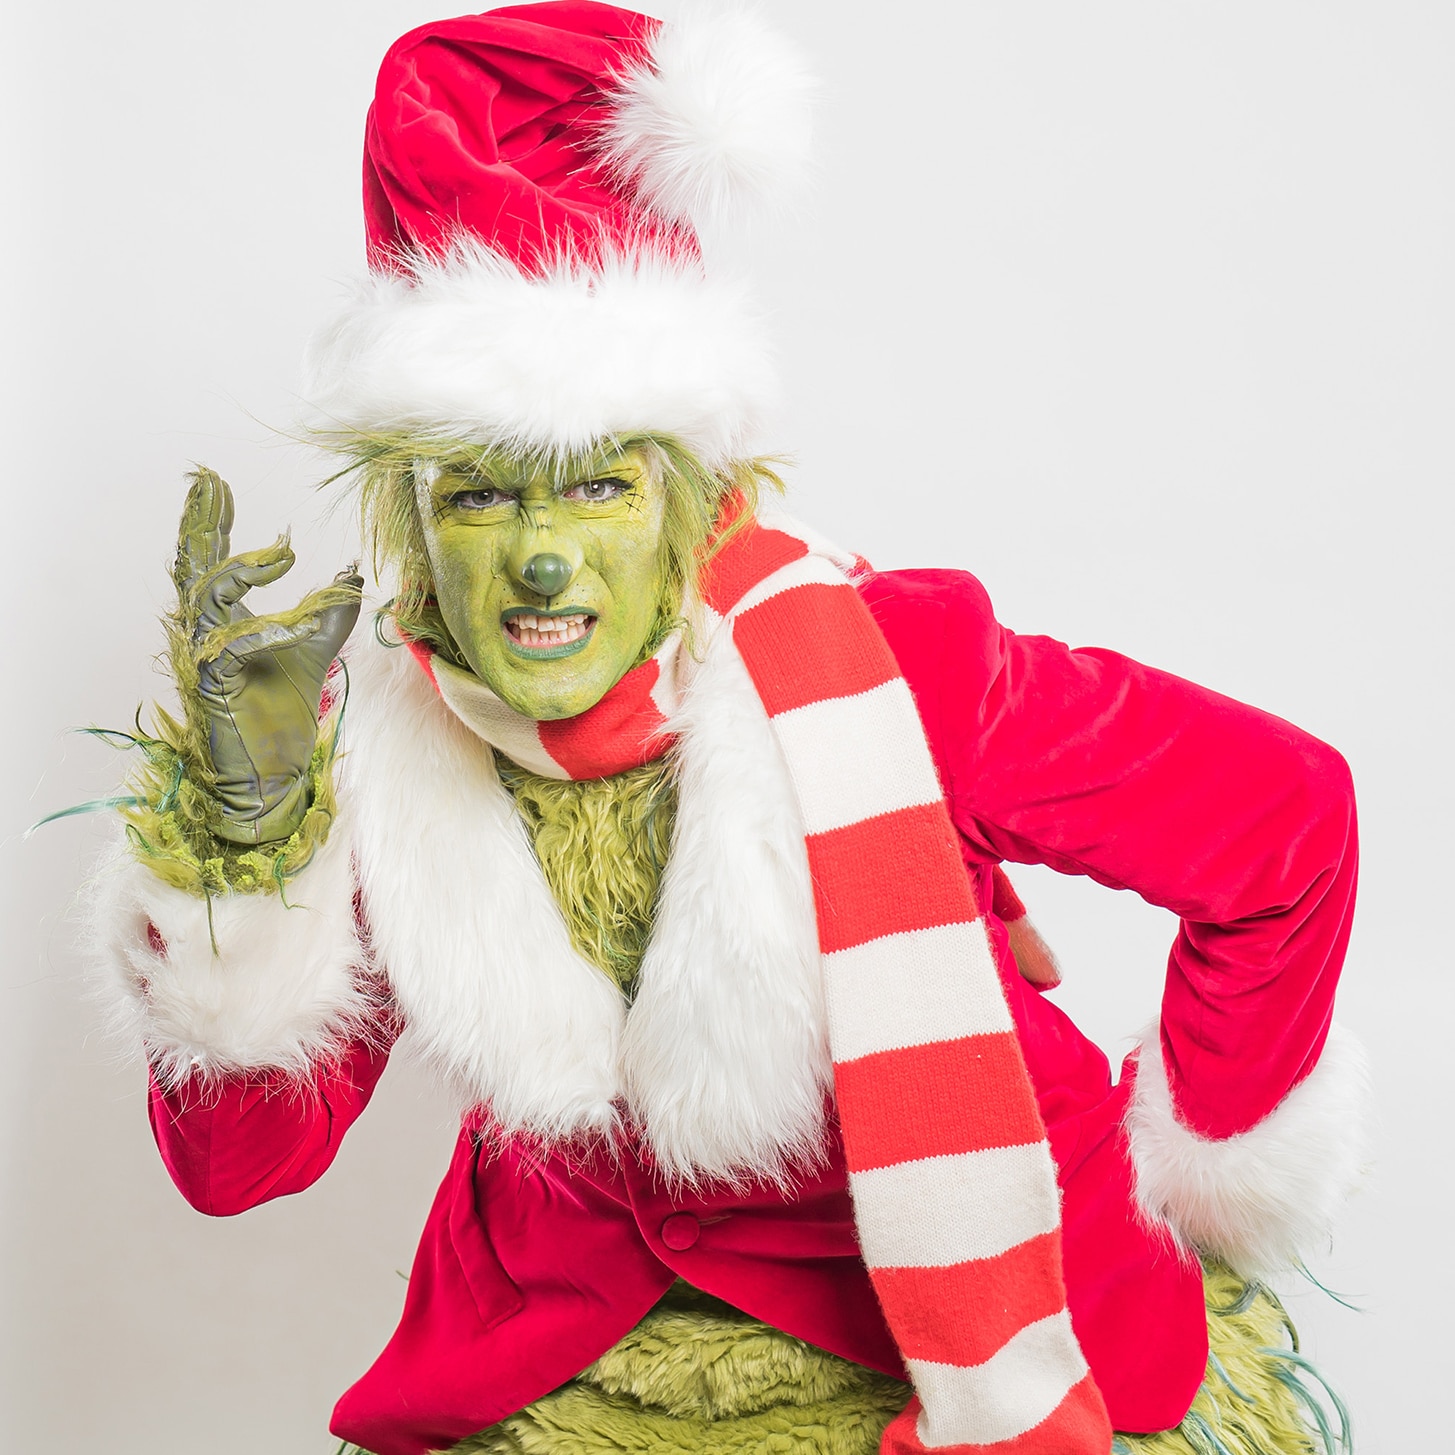 Collection 105+ Images pictures of the grinch characters Full HD, 2k, 4k